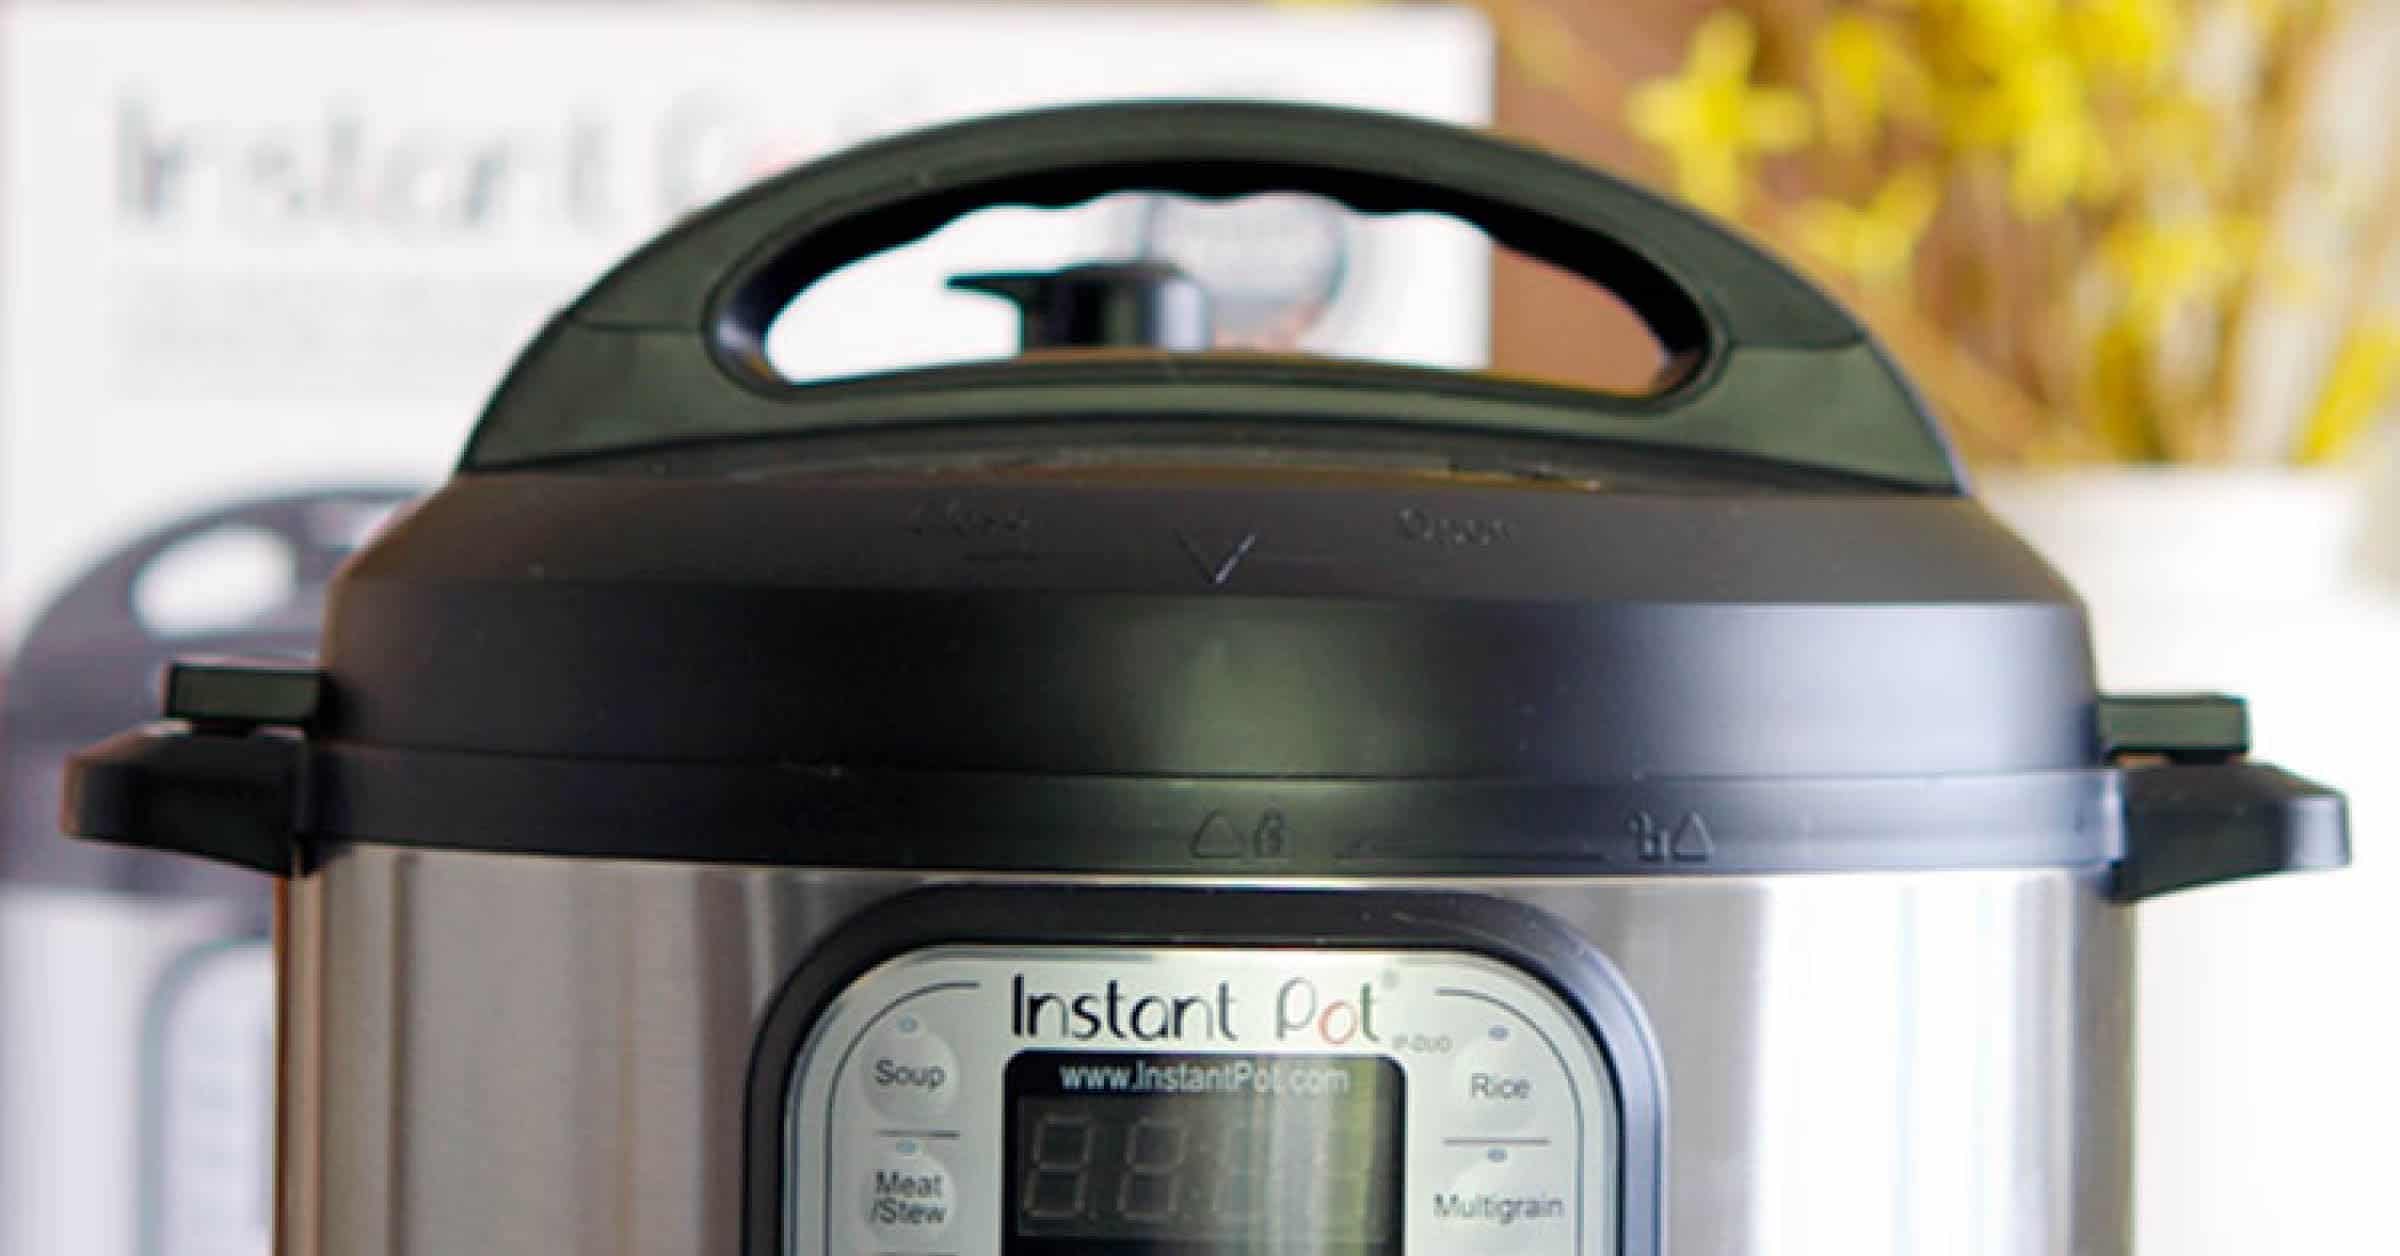  Instant  Pot  101 How to Use Your Instant  Pot  Guide  for 